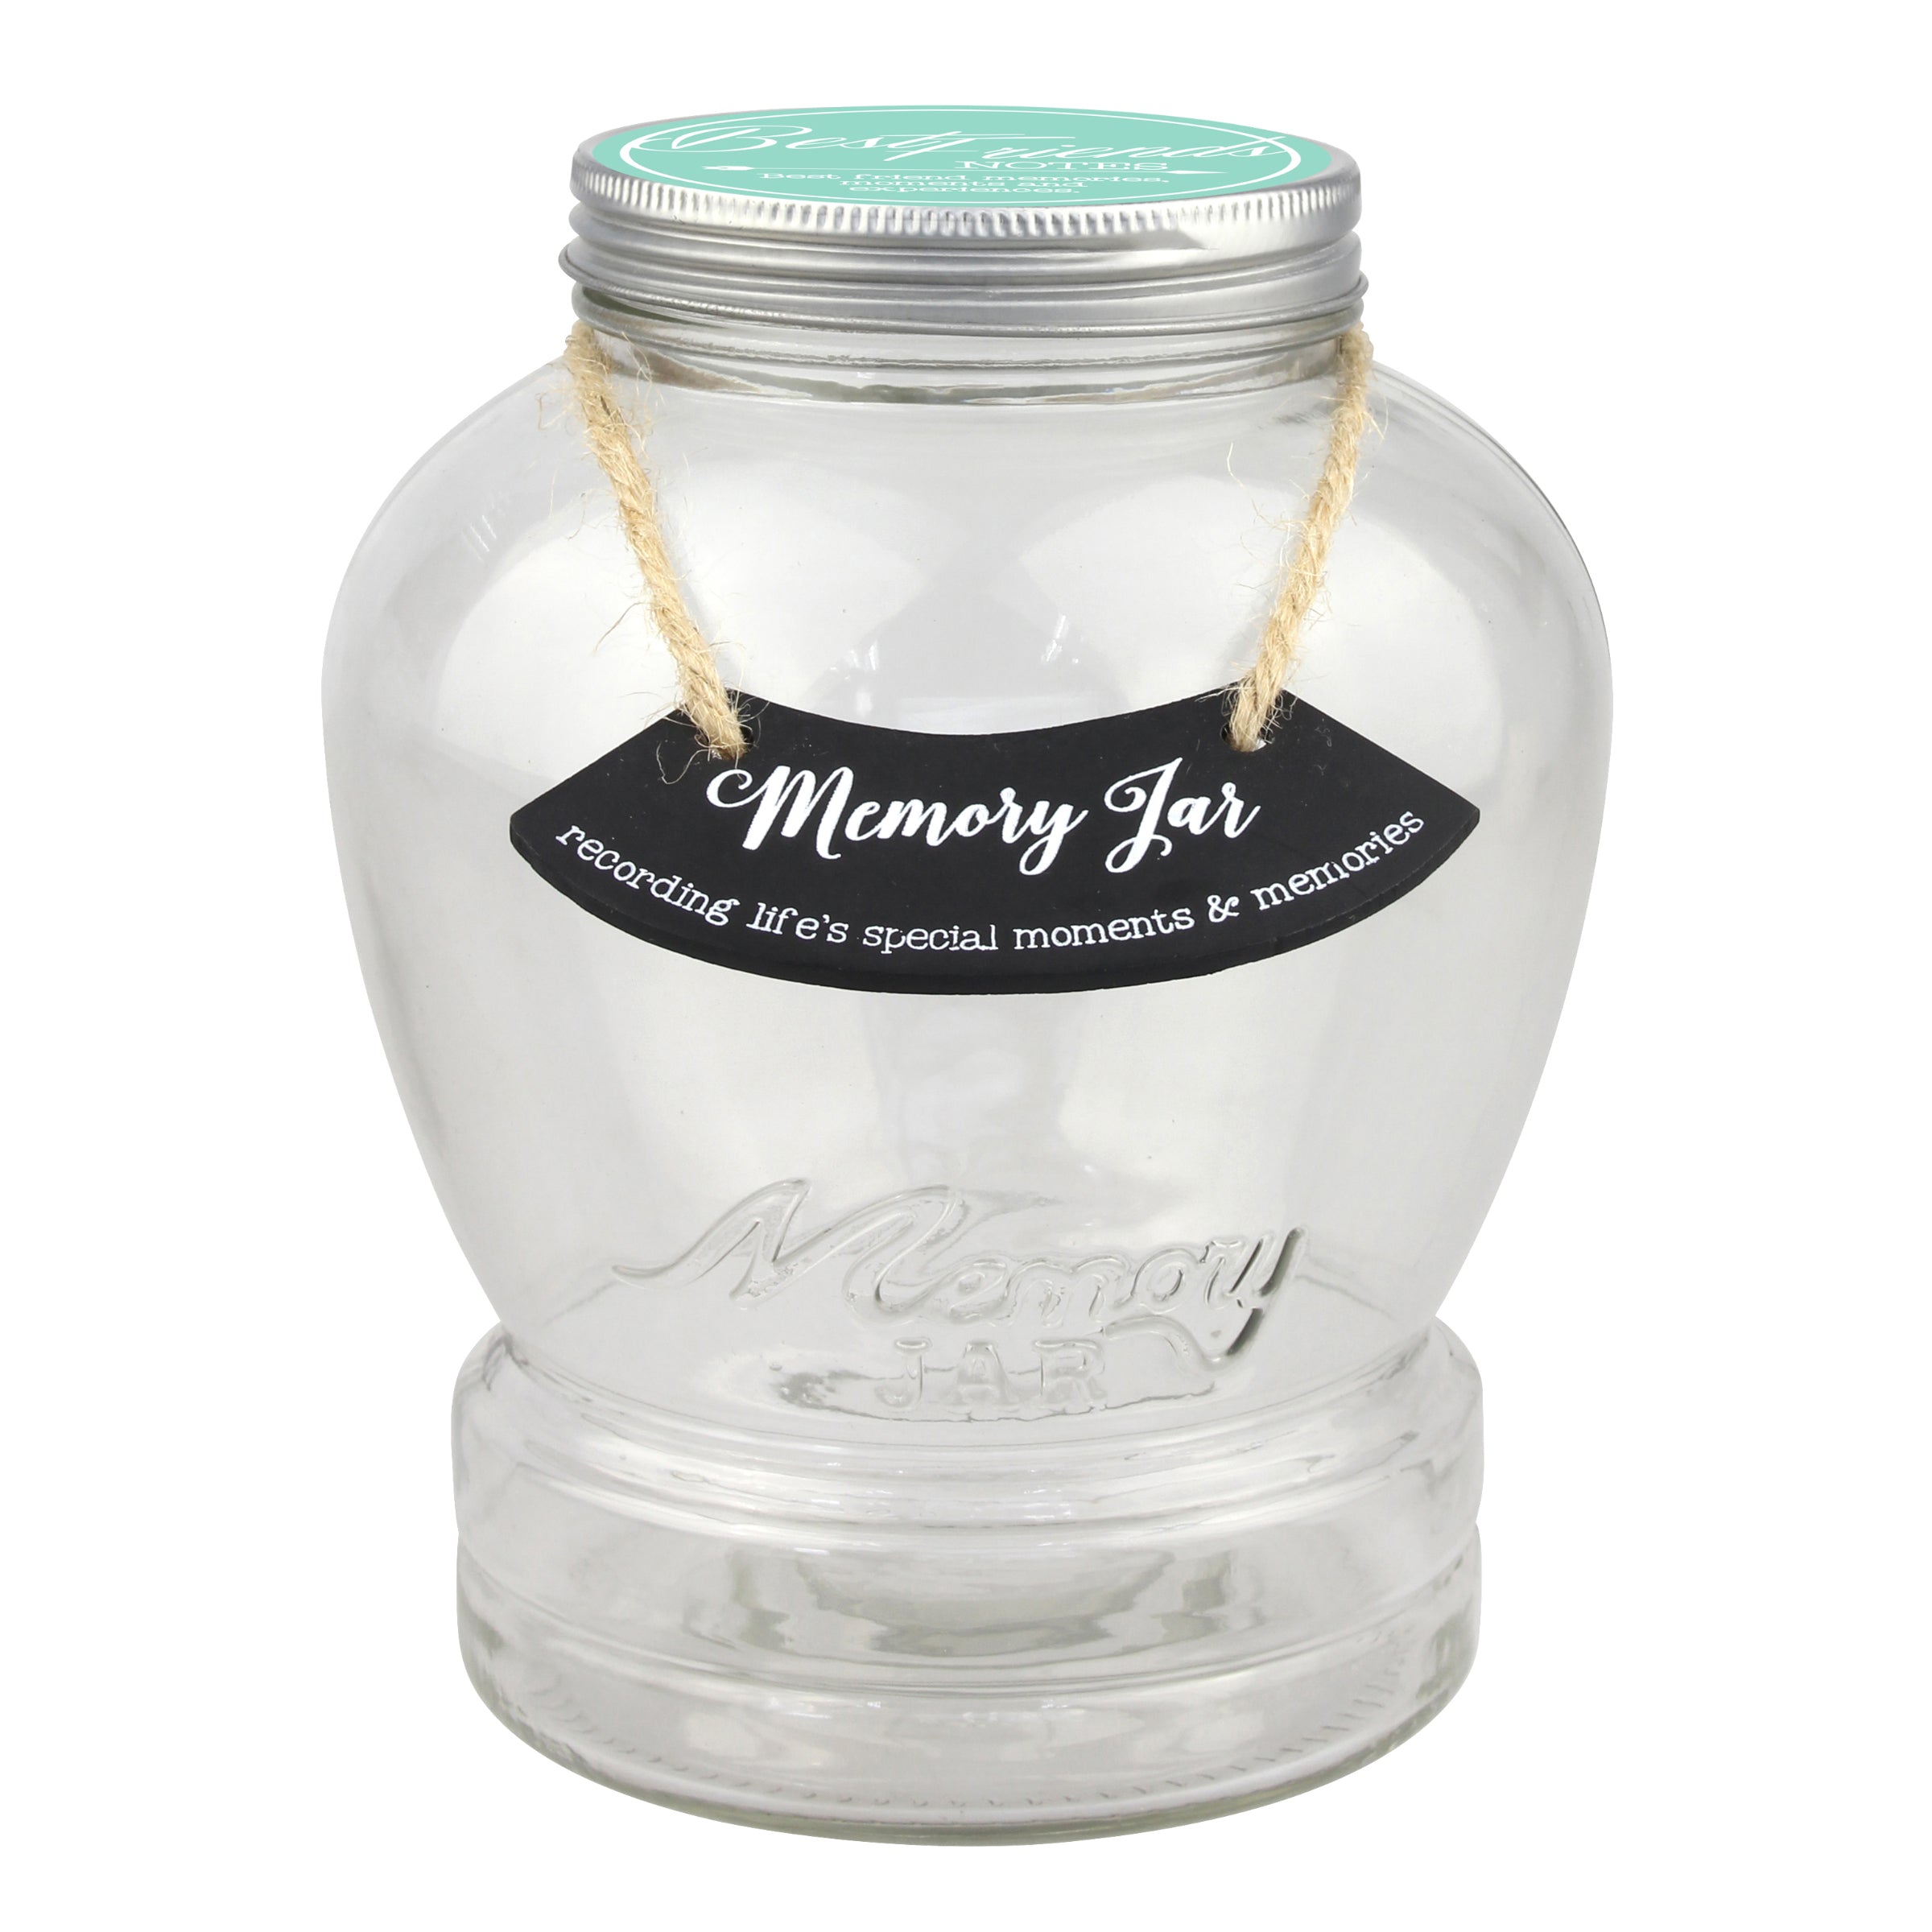 Top Shelf Best Friends Memory Jar With 180 Tickets, Pen, and Decorative Lid